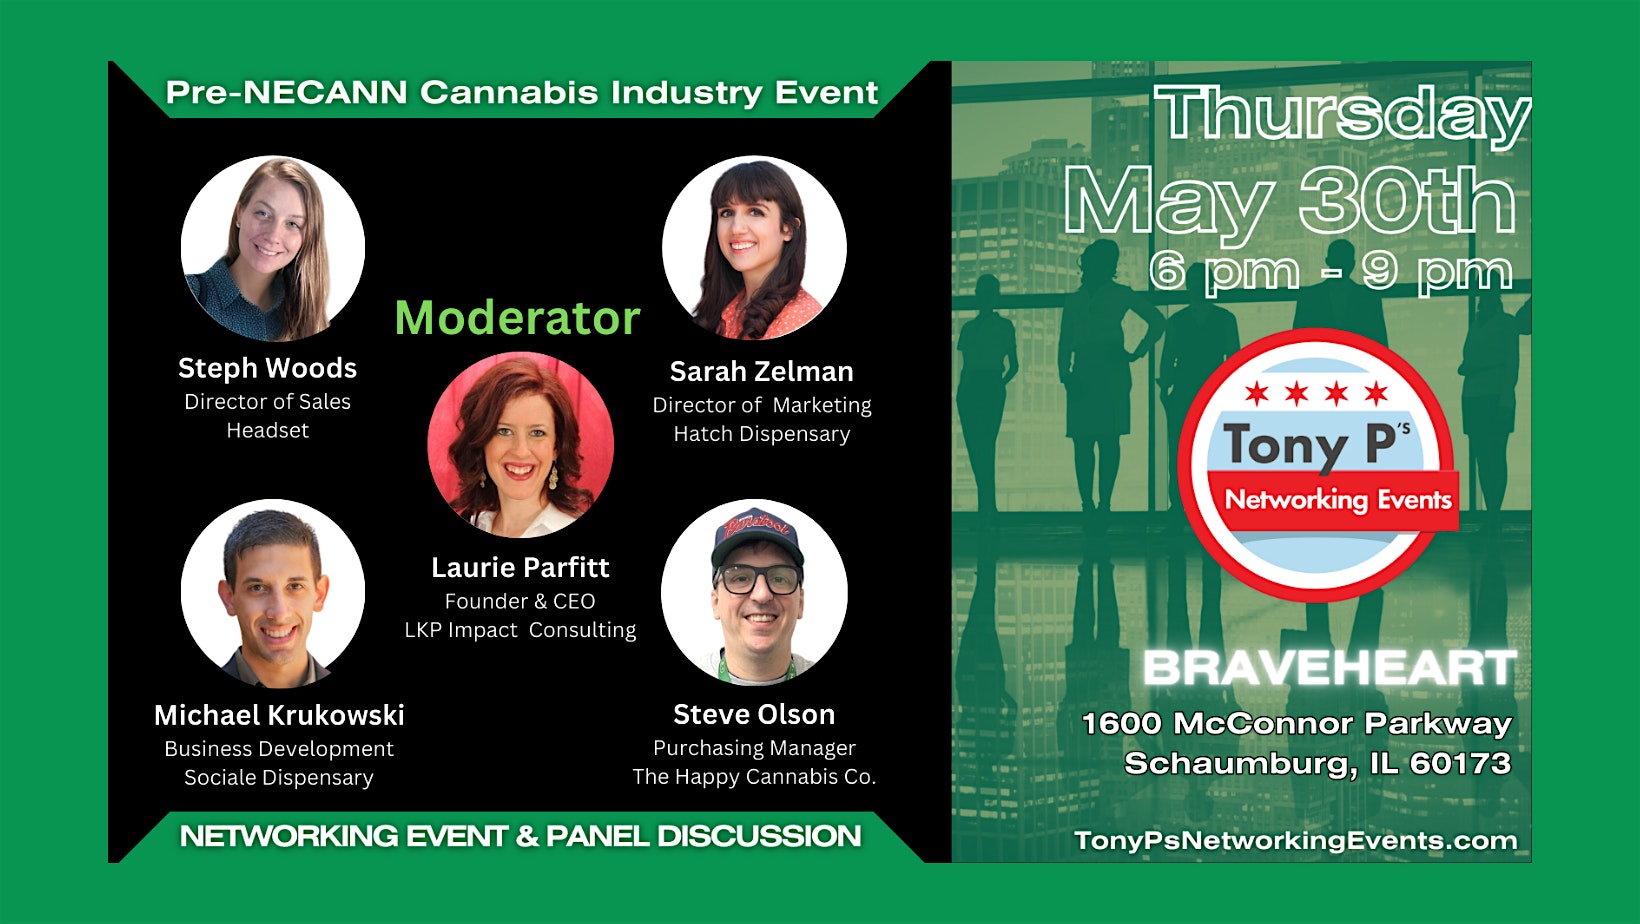 Tony P’s Pre-NECANN Cannabis Industry Networking Event & Panel Discussion